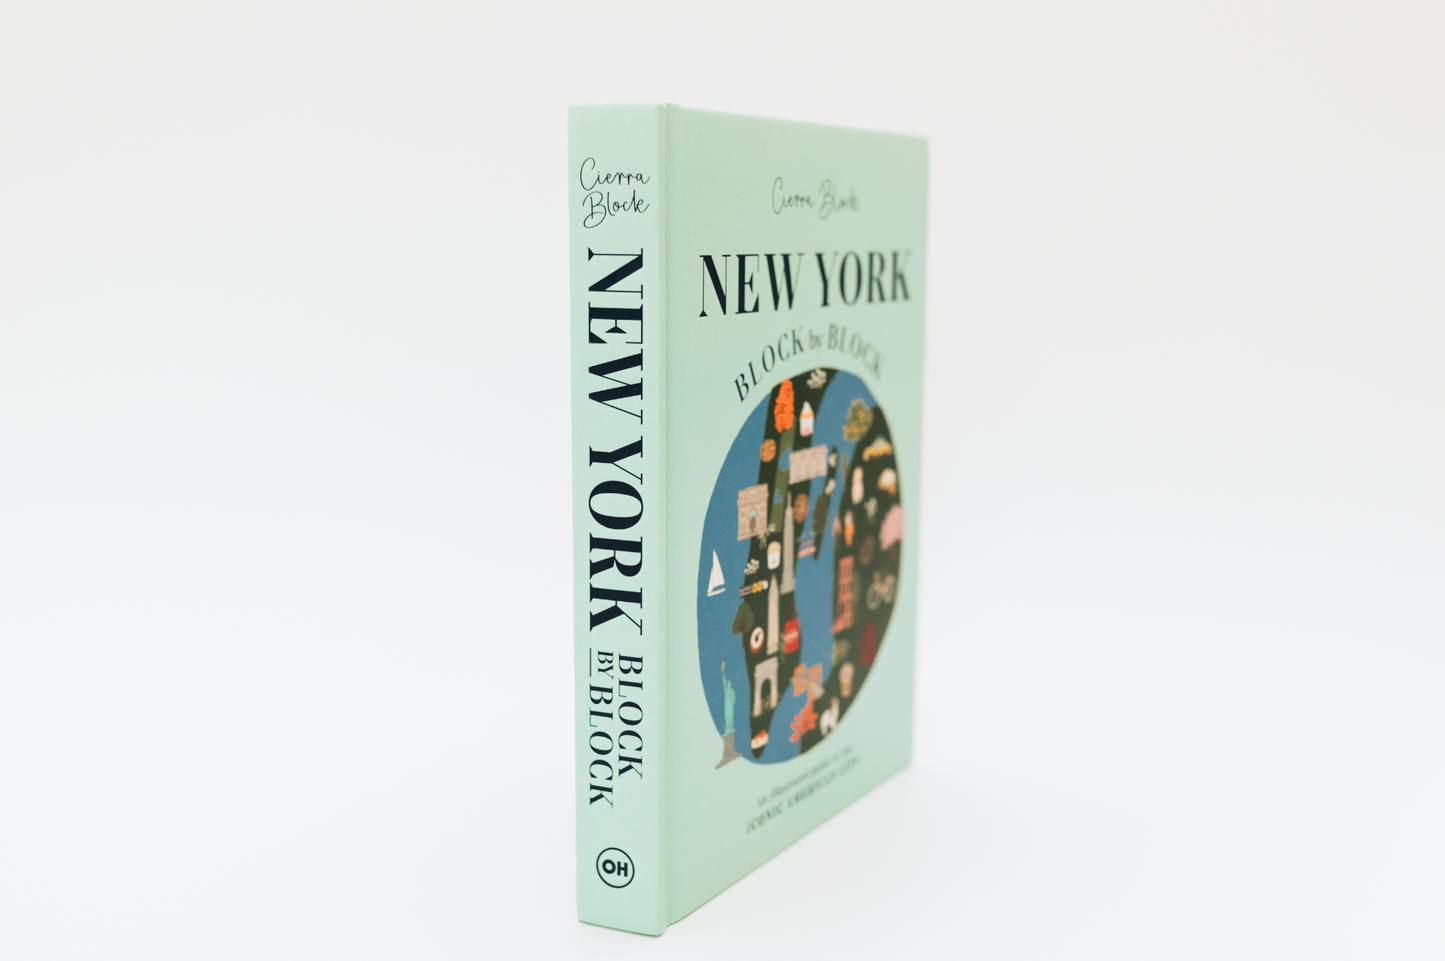 New York Block by Block (Signed Copy)